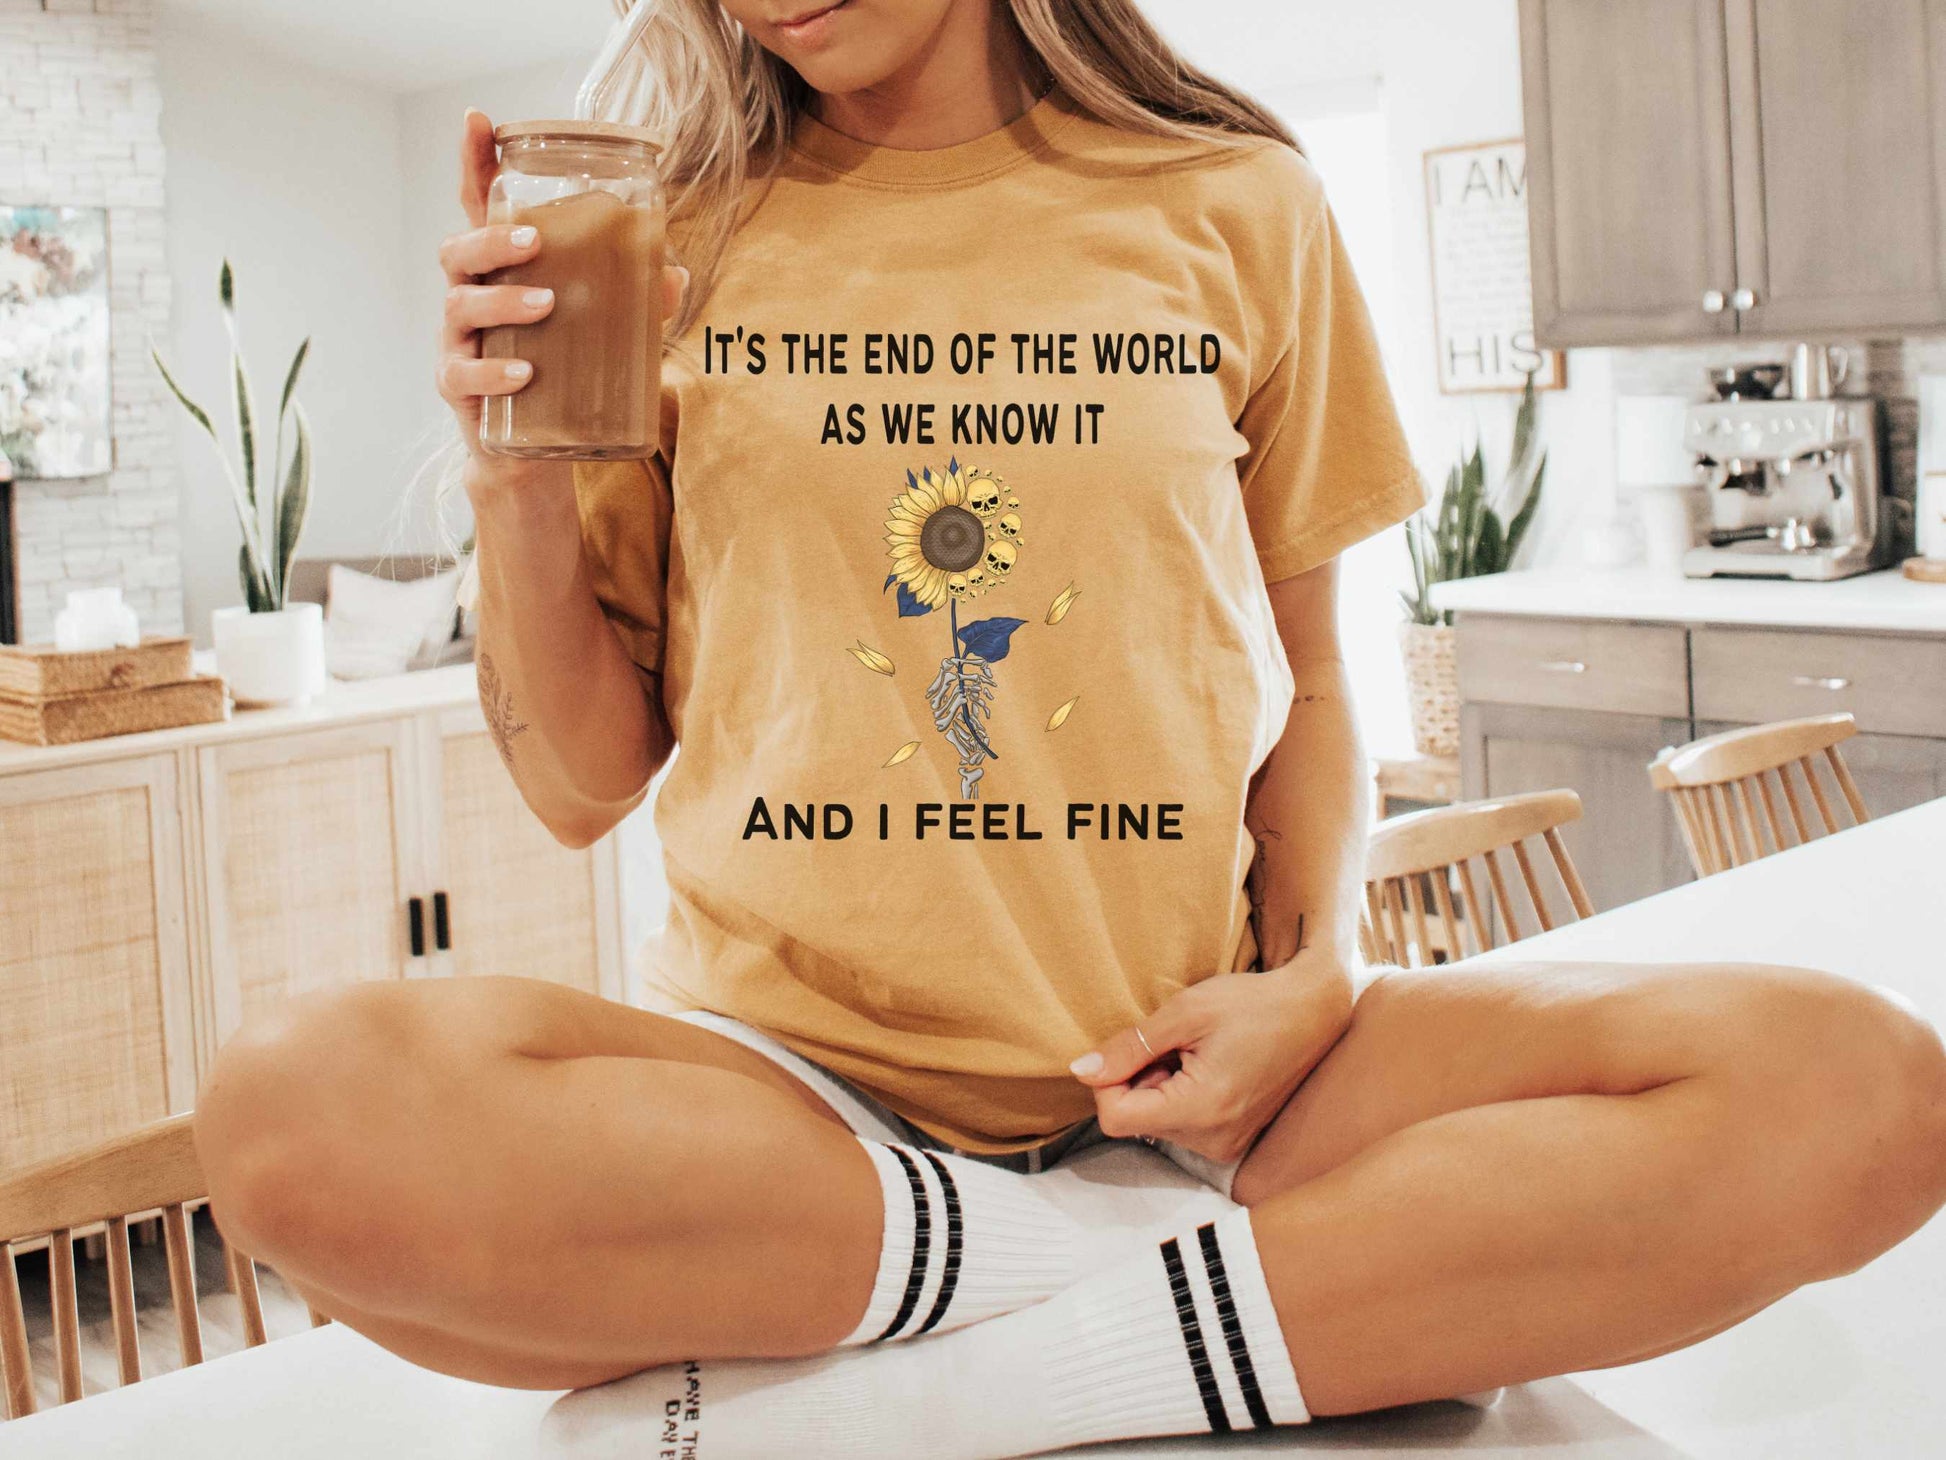 R.E.M."End of World" GraphicT-Shirt in Mustard